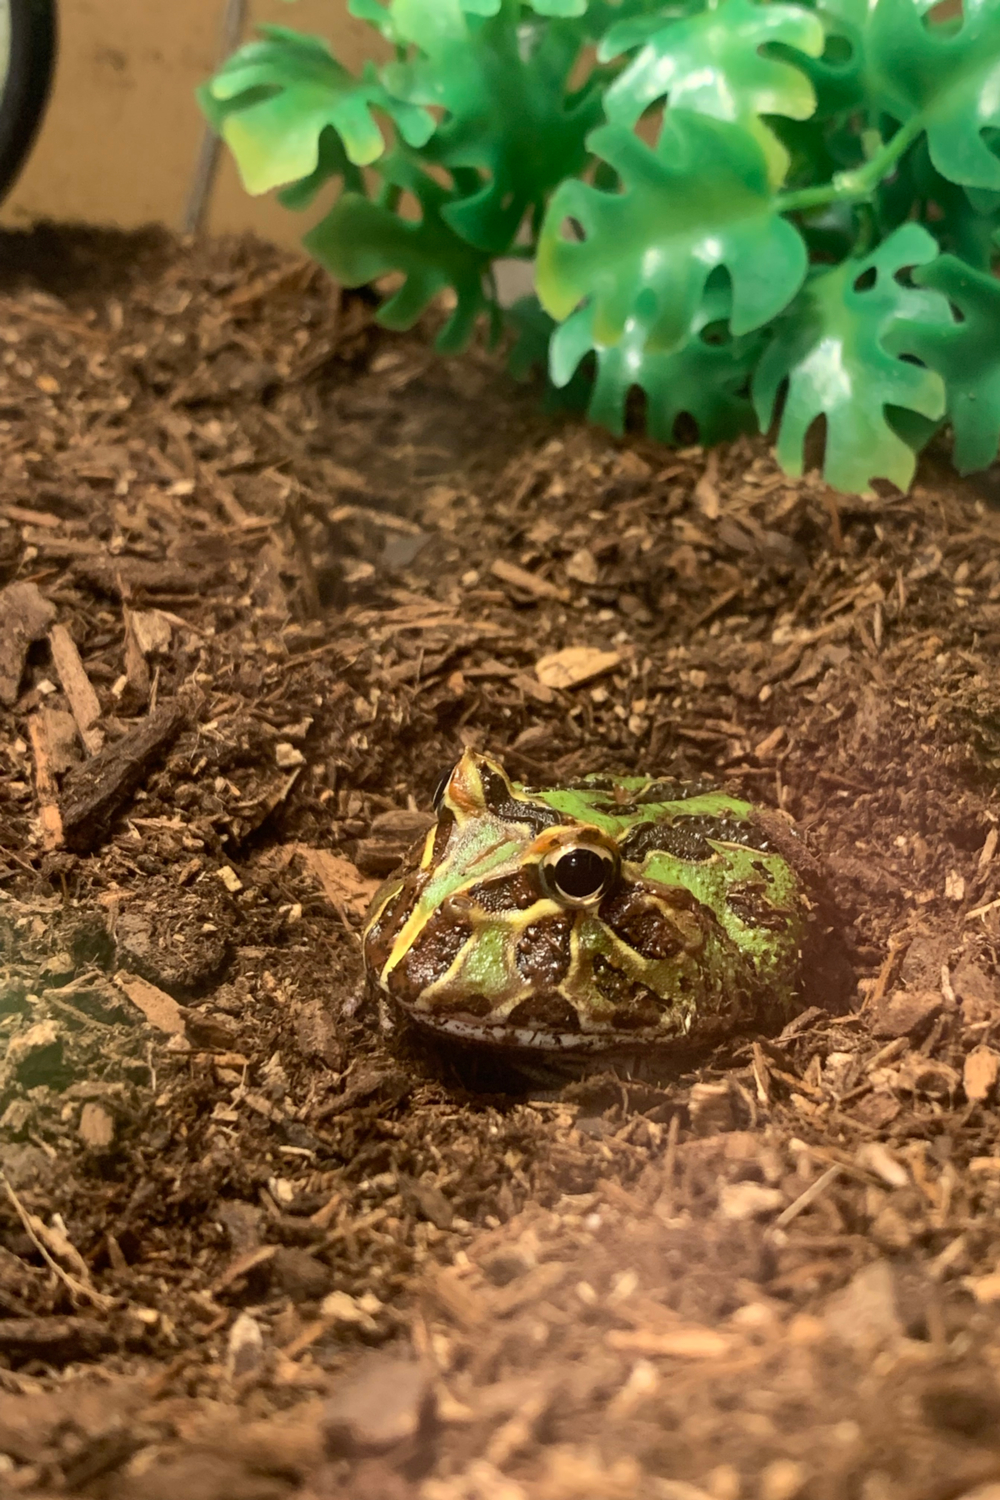 What do Pacman frogs as a pet